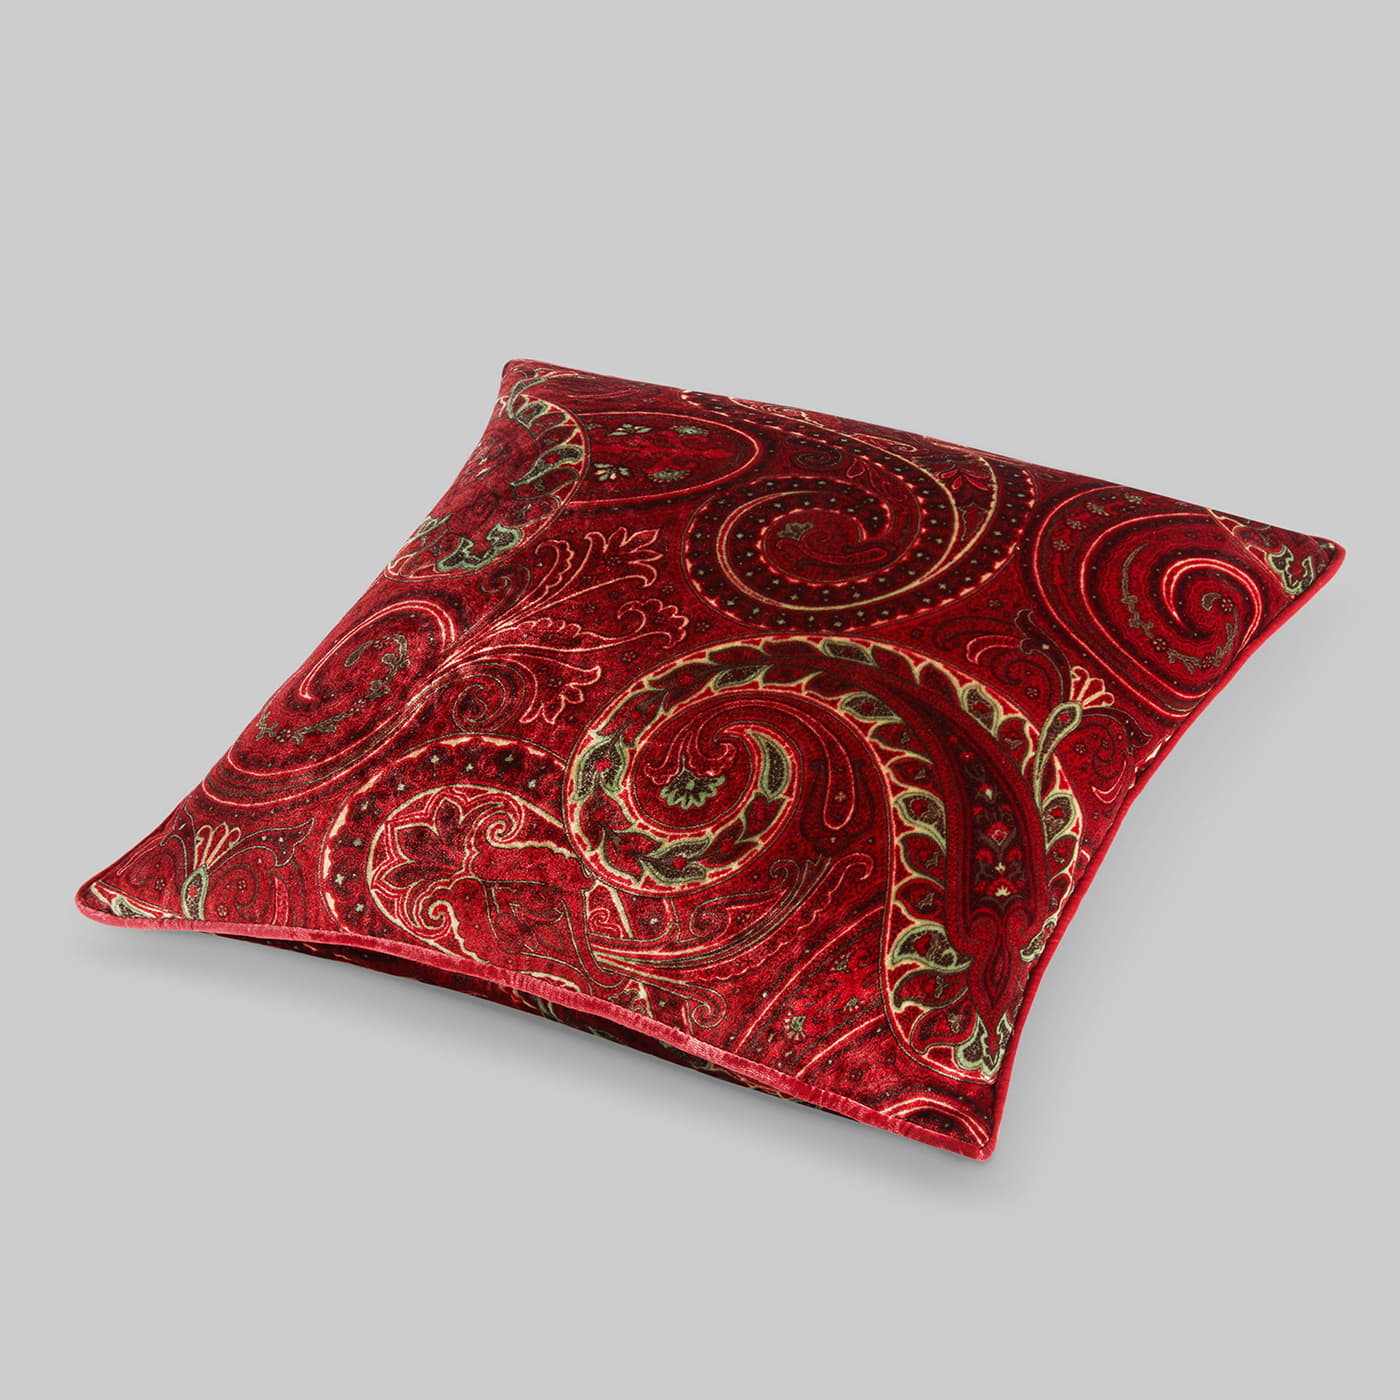 Set of 2 Harnes Cushions and 1 Atbara Blanket - ETRO Home Accessory